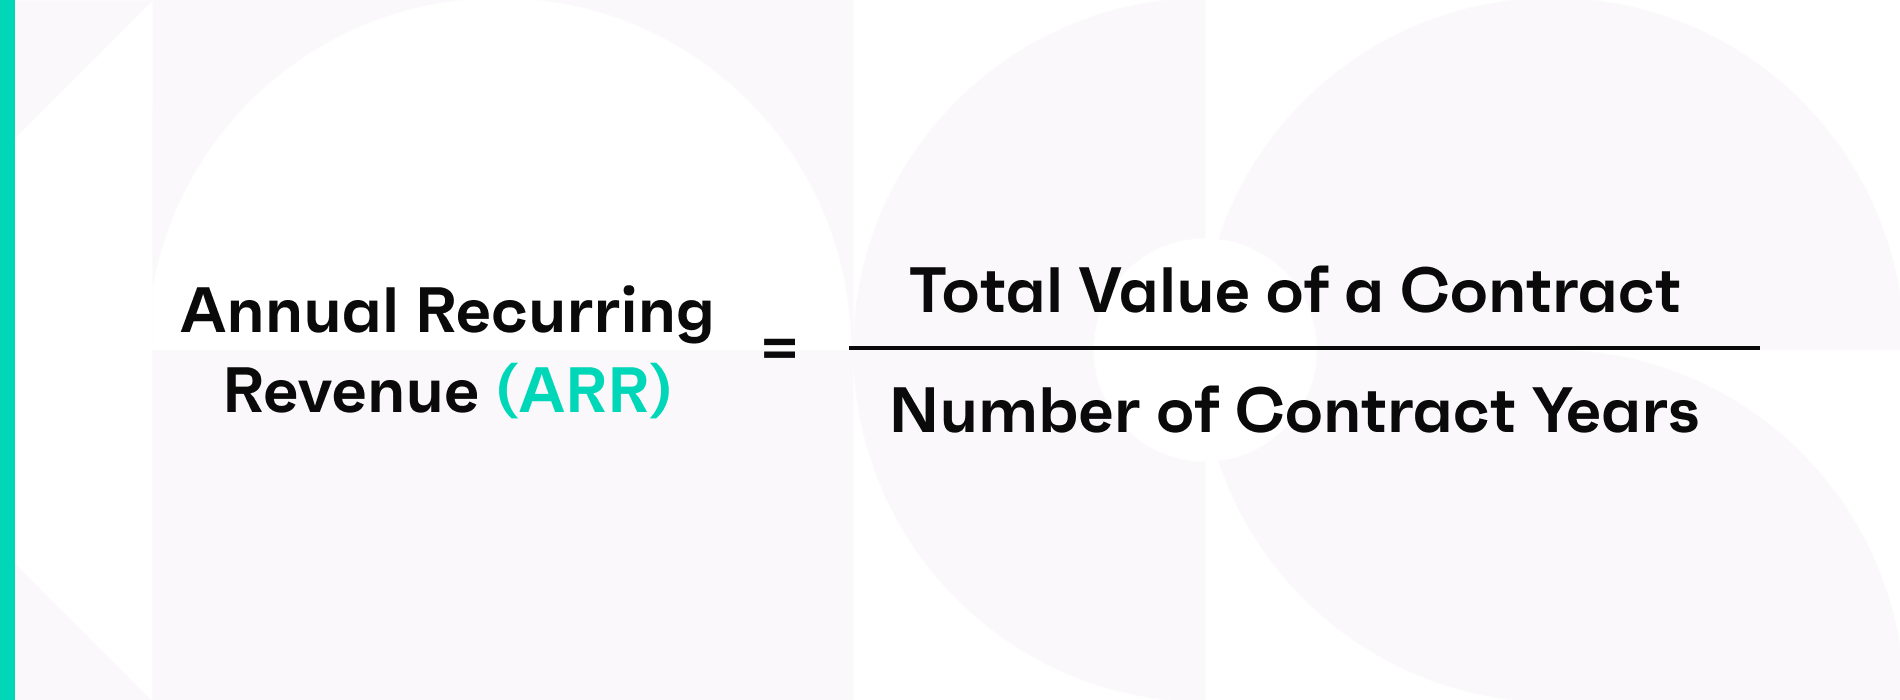 Annual recurring revenue (ARR) = (total value of a contract) / (number of contract years)